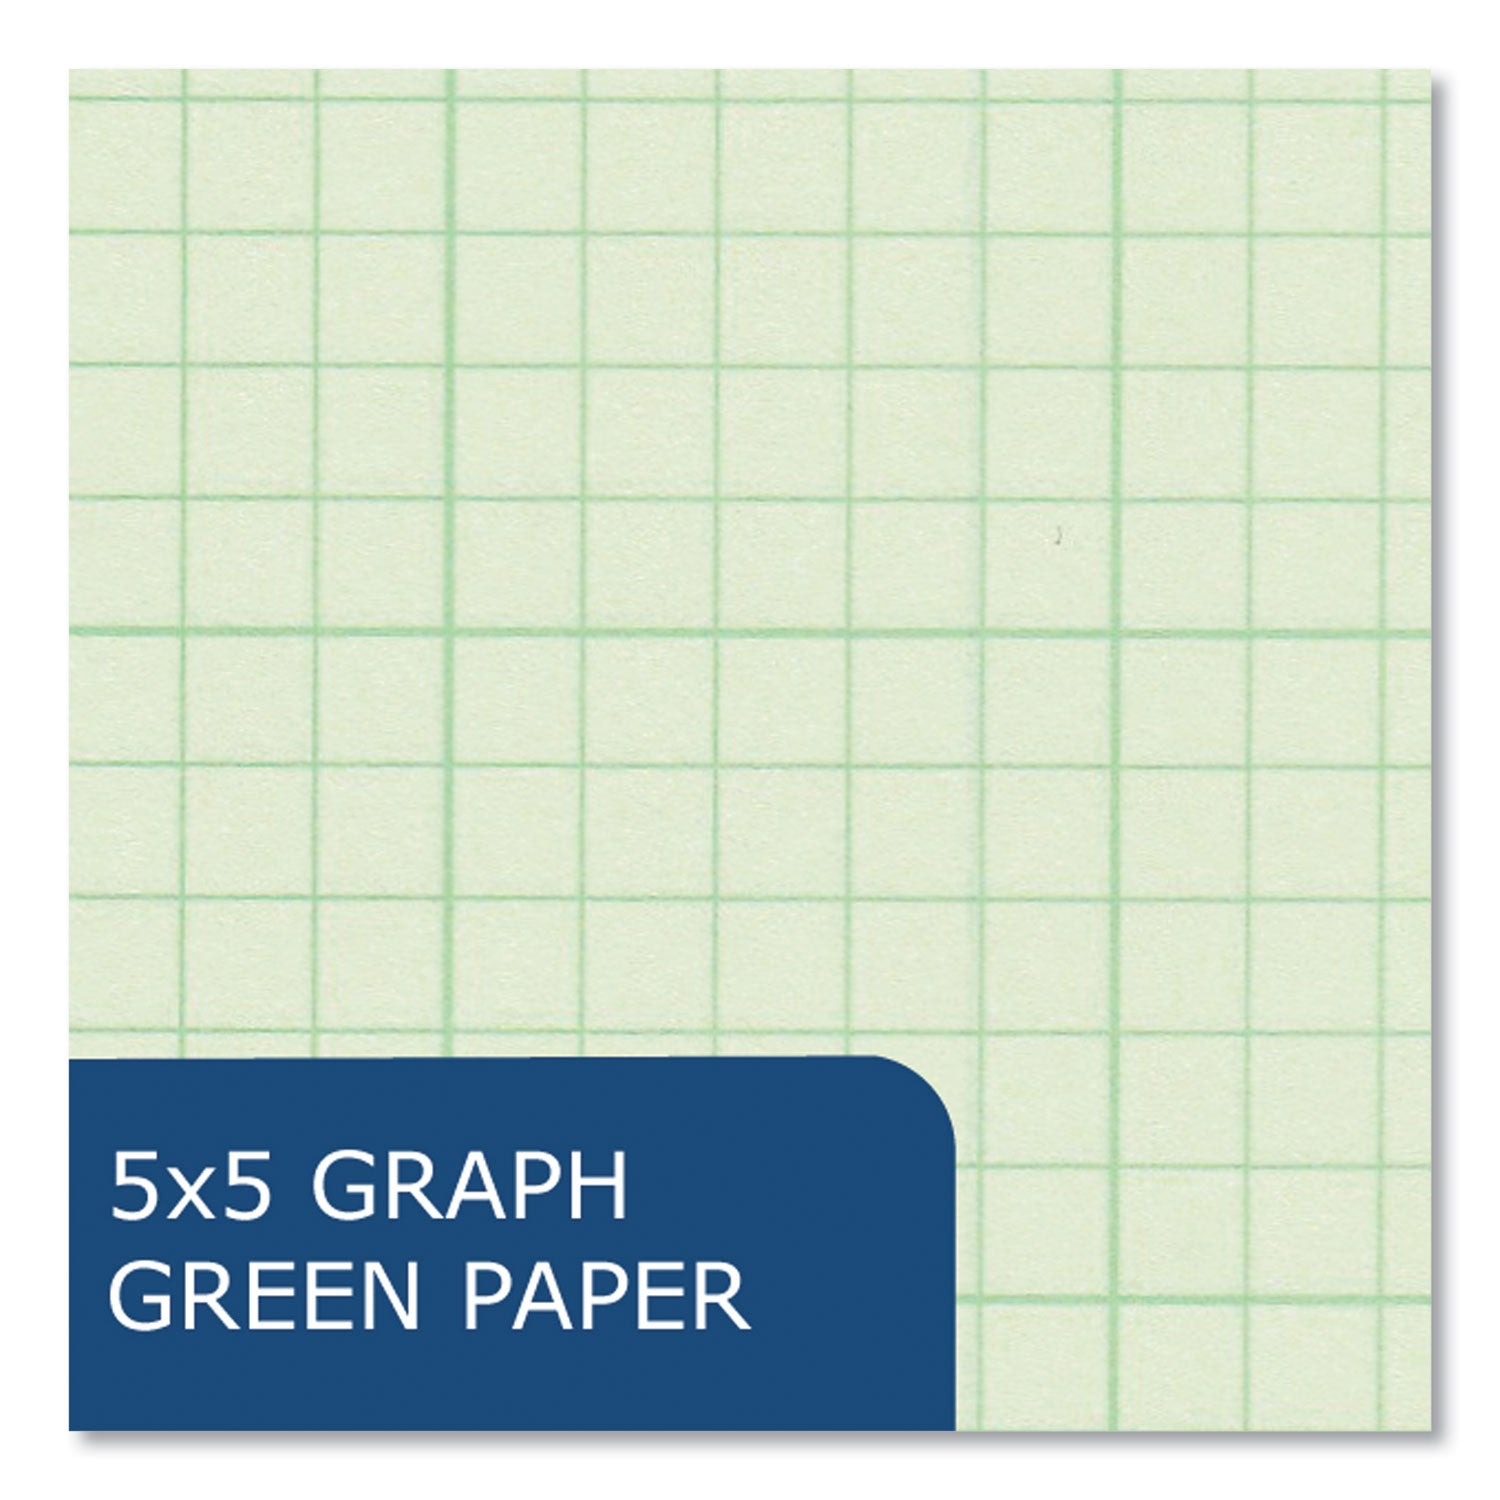 engineer-pad-05-margins-quad-rule-5-sq-in-1-sq-in-100-lt-green-85x11-sheets-pad-24-ct-ships-in-4-6-business-days_roa95382cs - 8